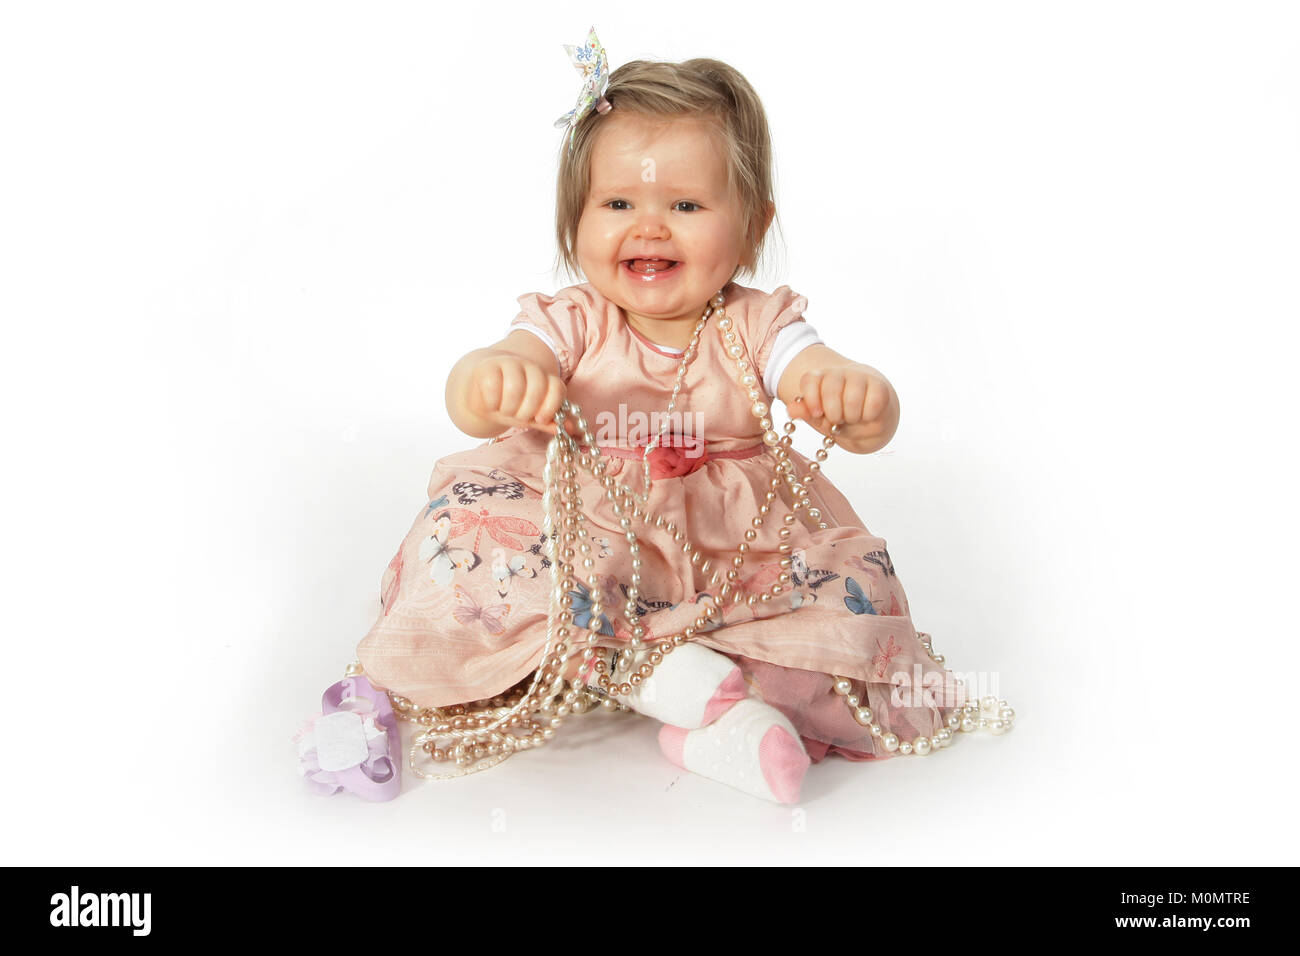 1 year old beautiful girl in pretty dress, child development, personal and social skills Stock Photo